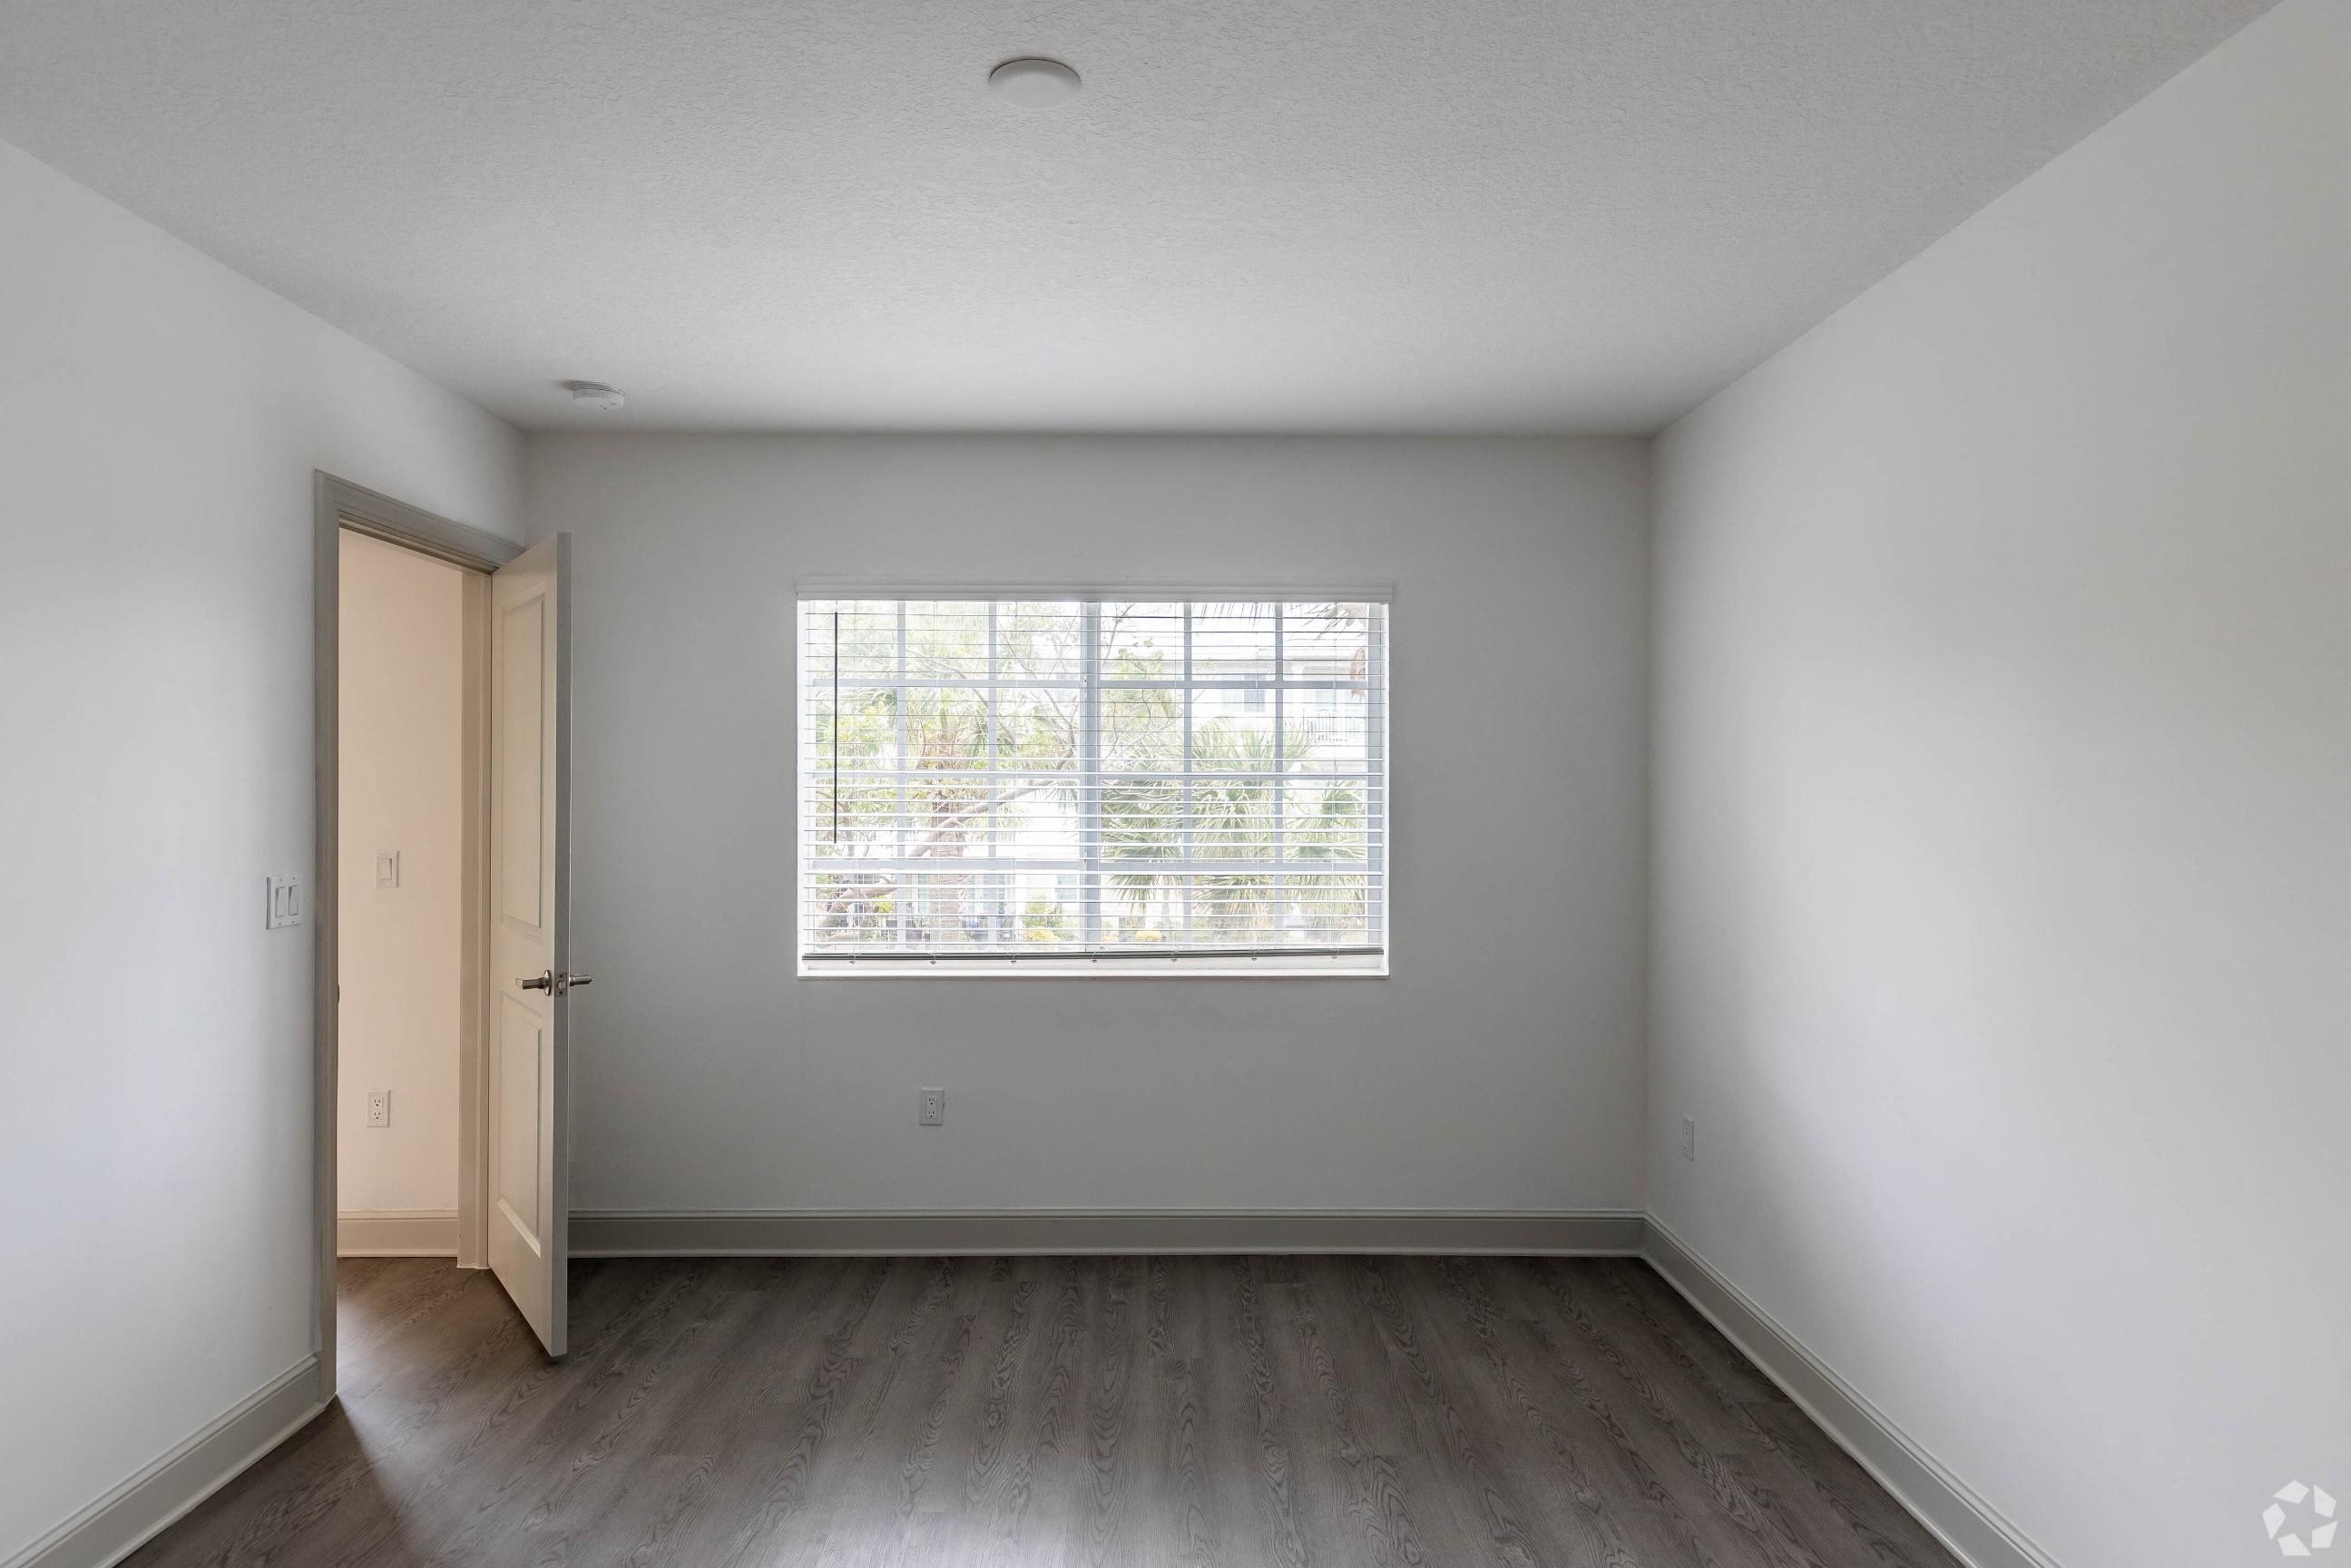 the living room of an empty house with a large window